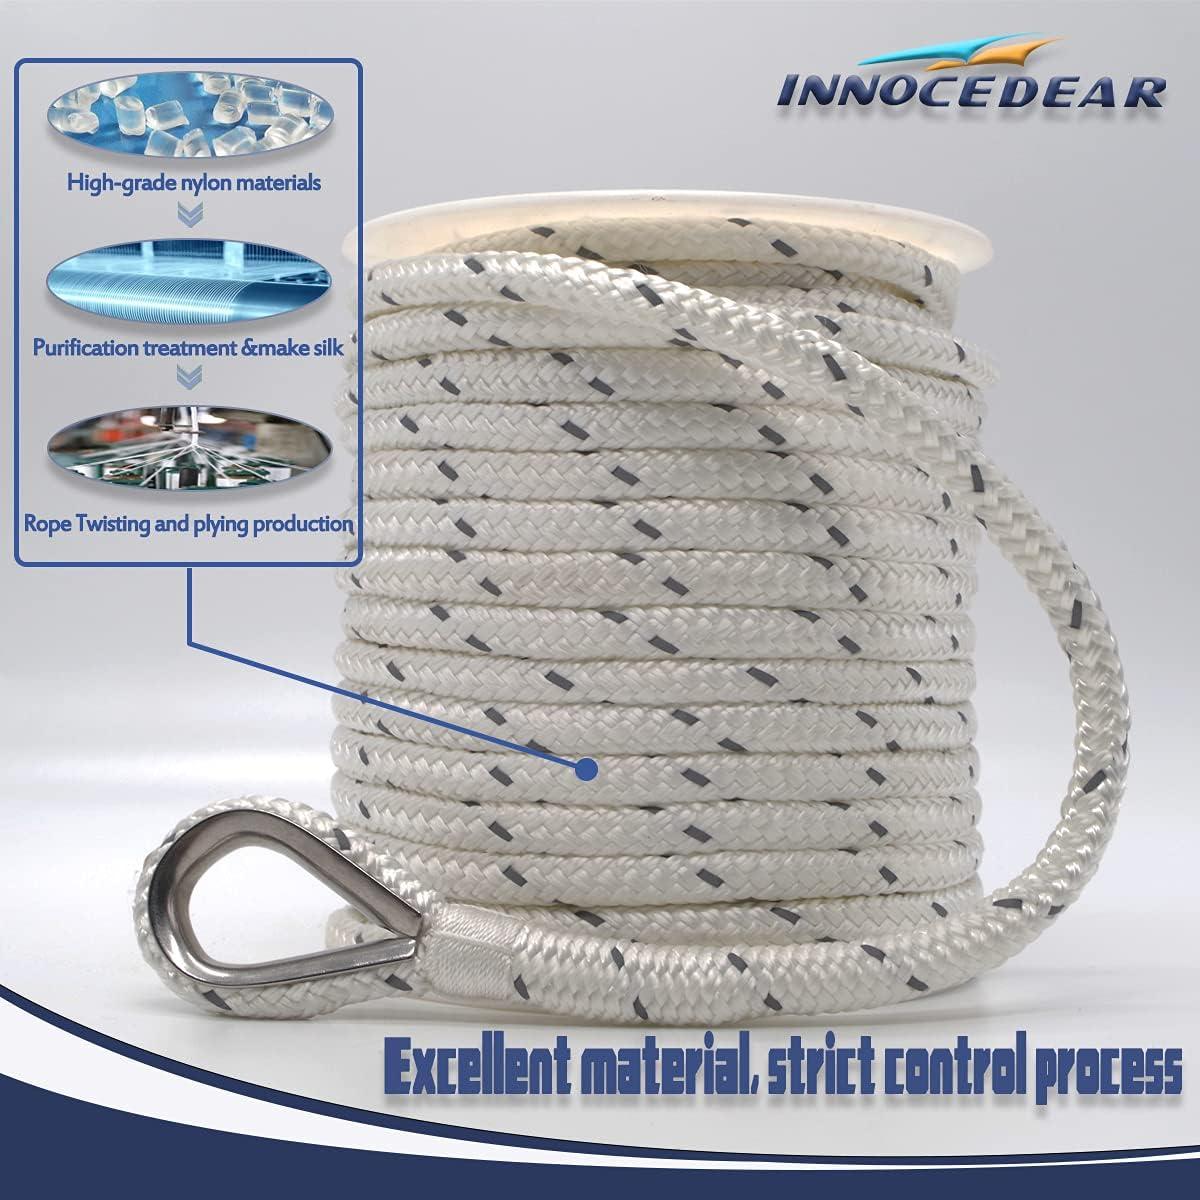 Double Braided Nylon Boat Anchor Rope With 316 Stainless Steel